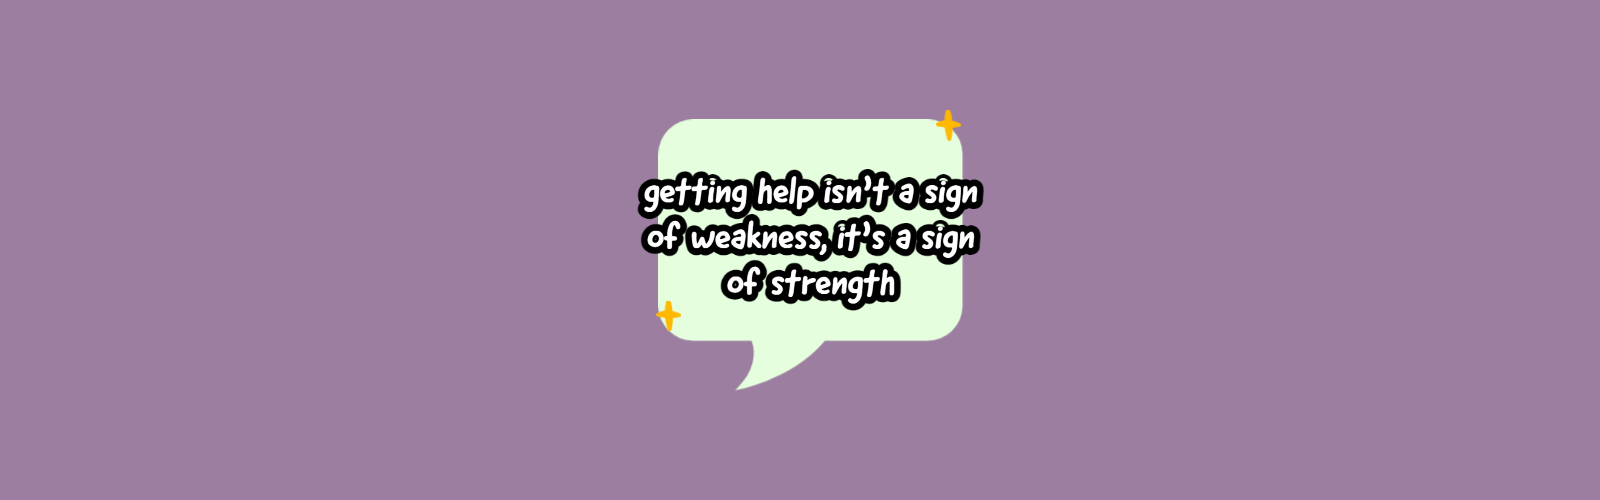 Getting help isn't a sign of weakness,it's a sign of strength.